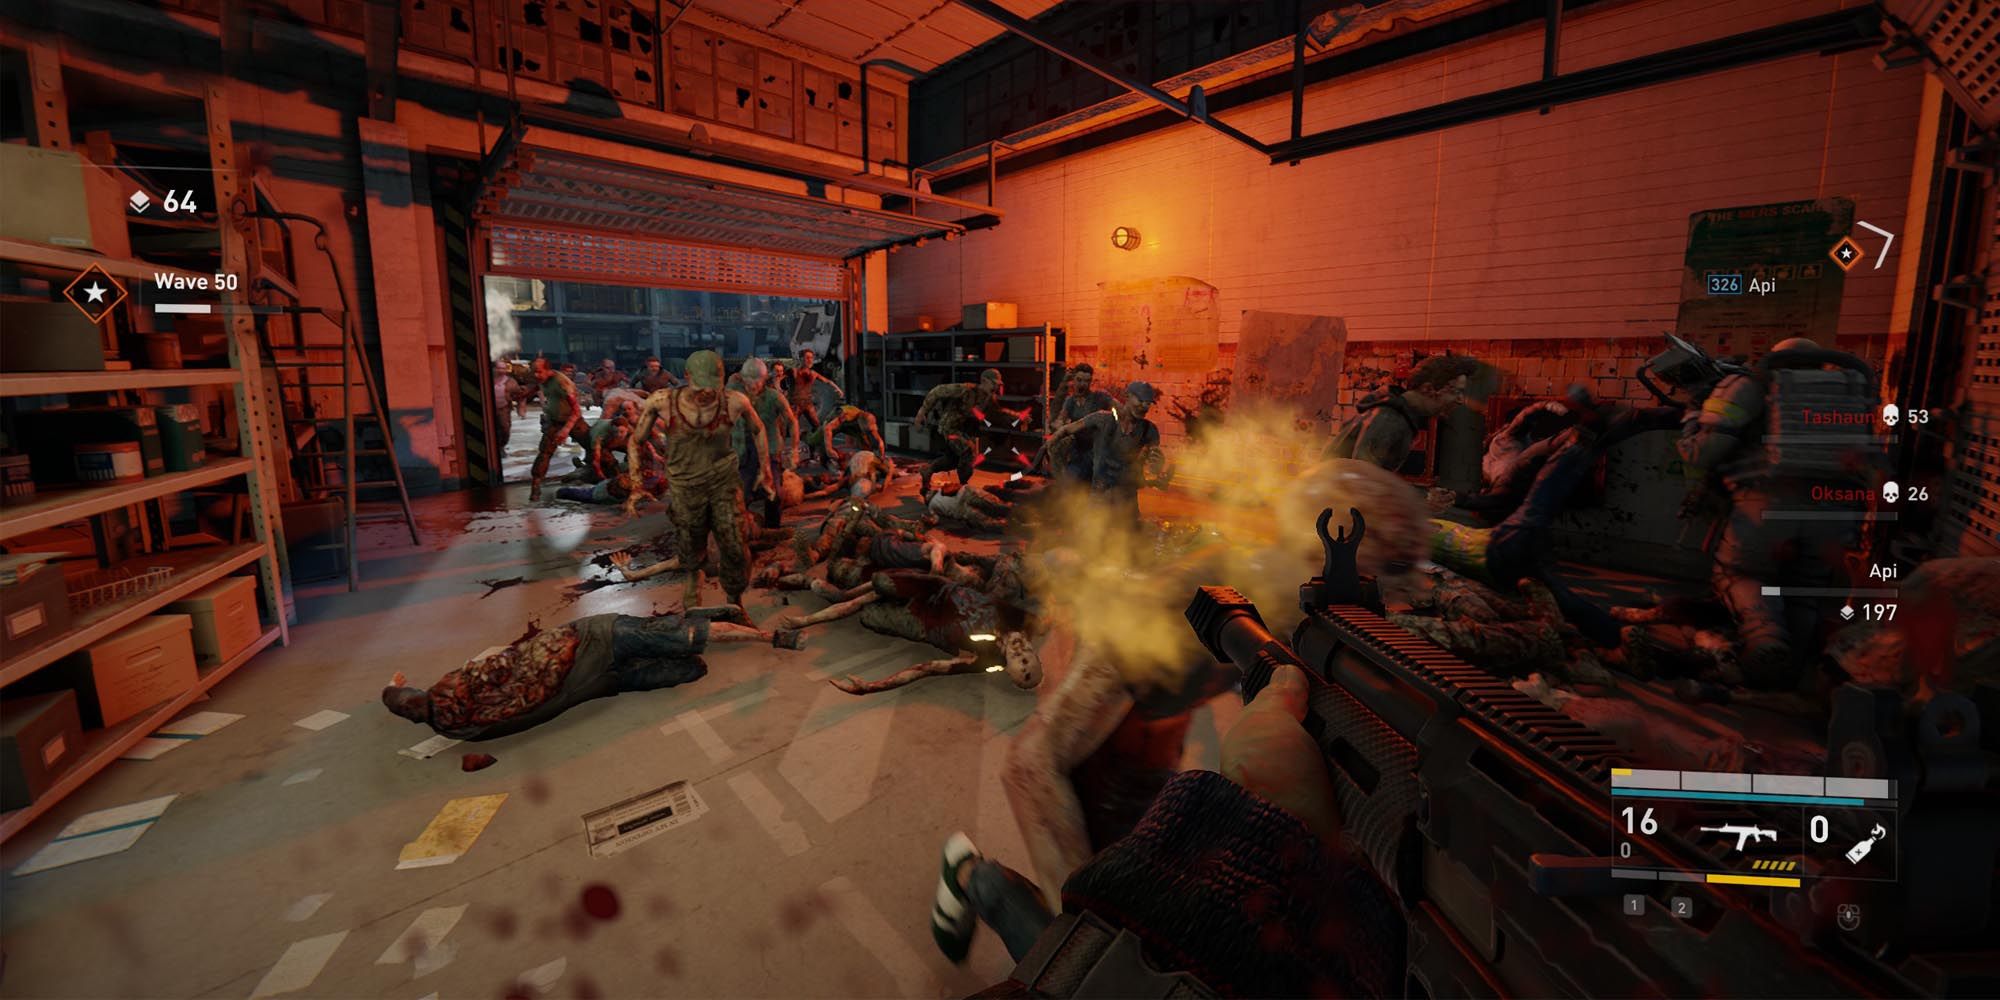 World War Z horde mode finally arrives with an explosive new zombie type